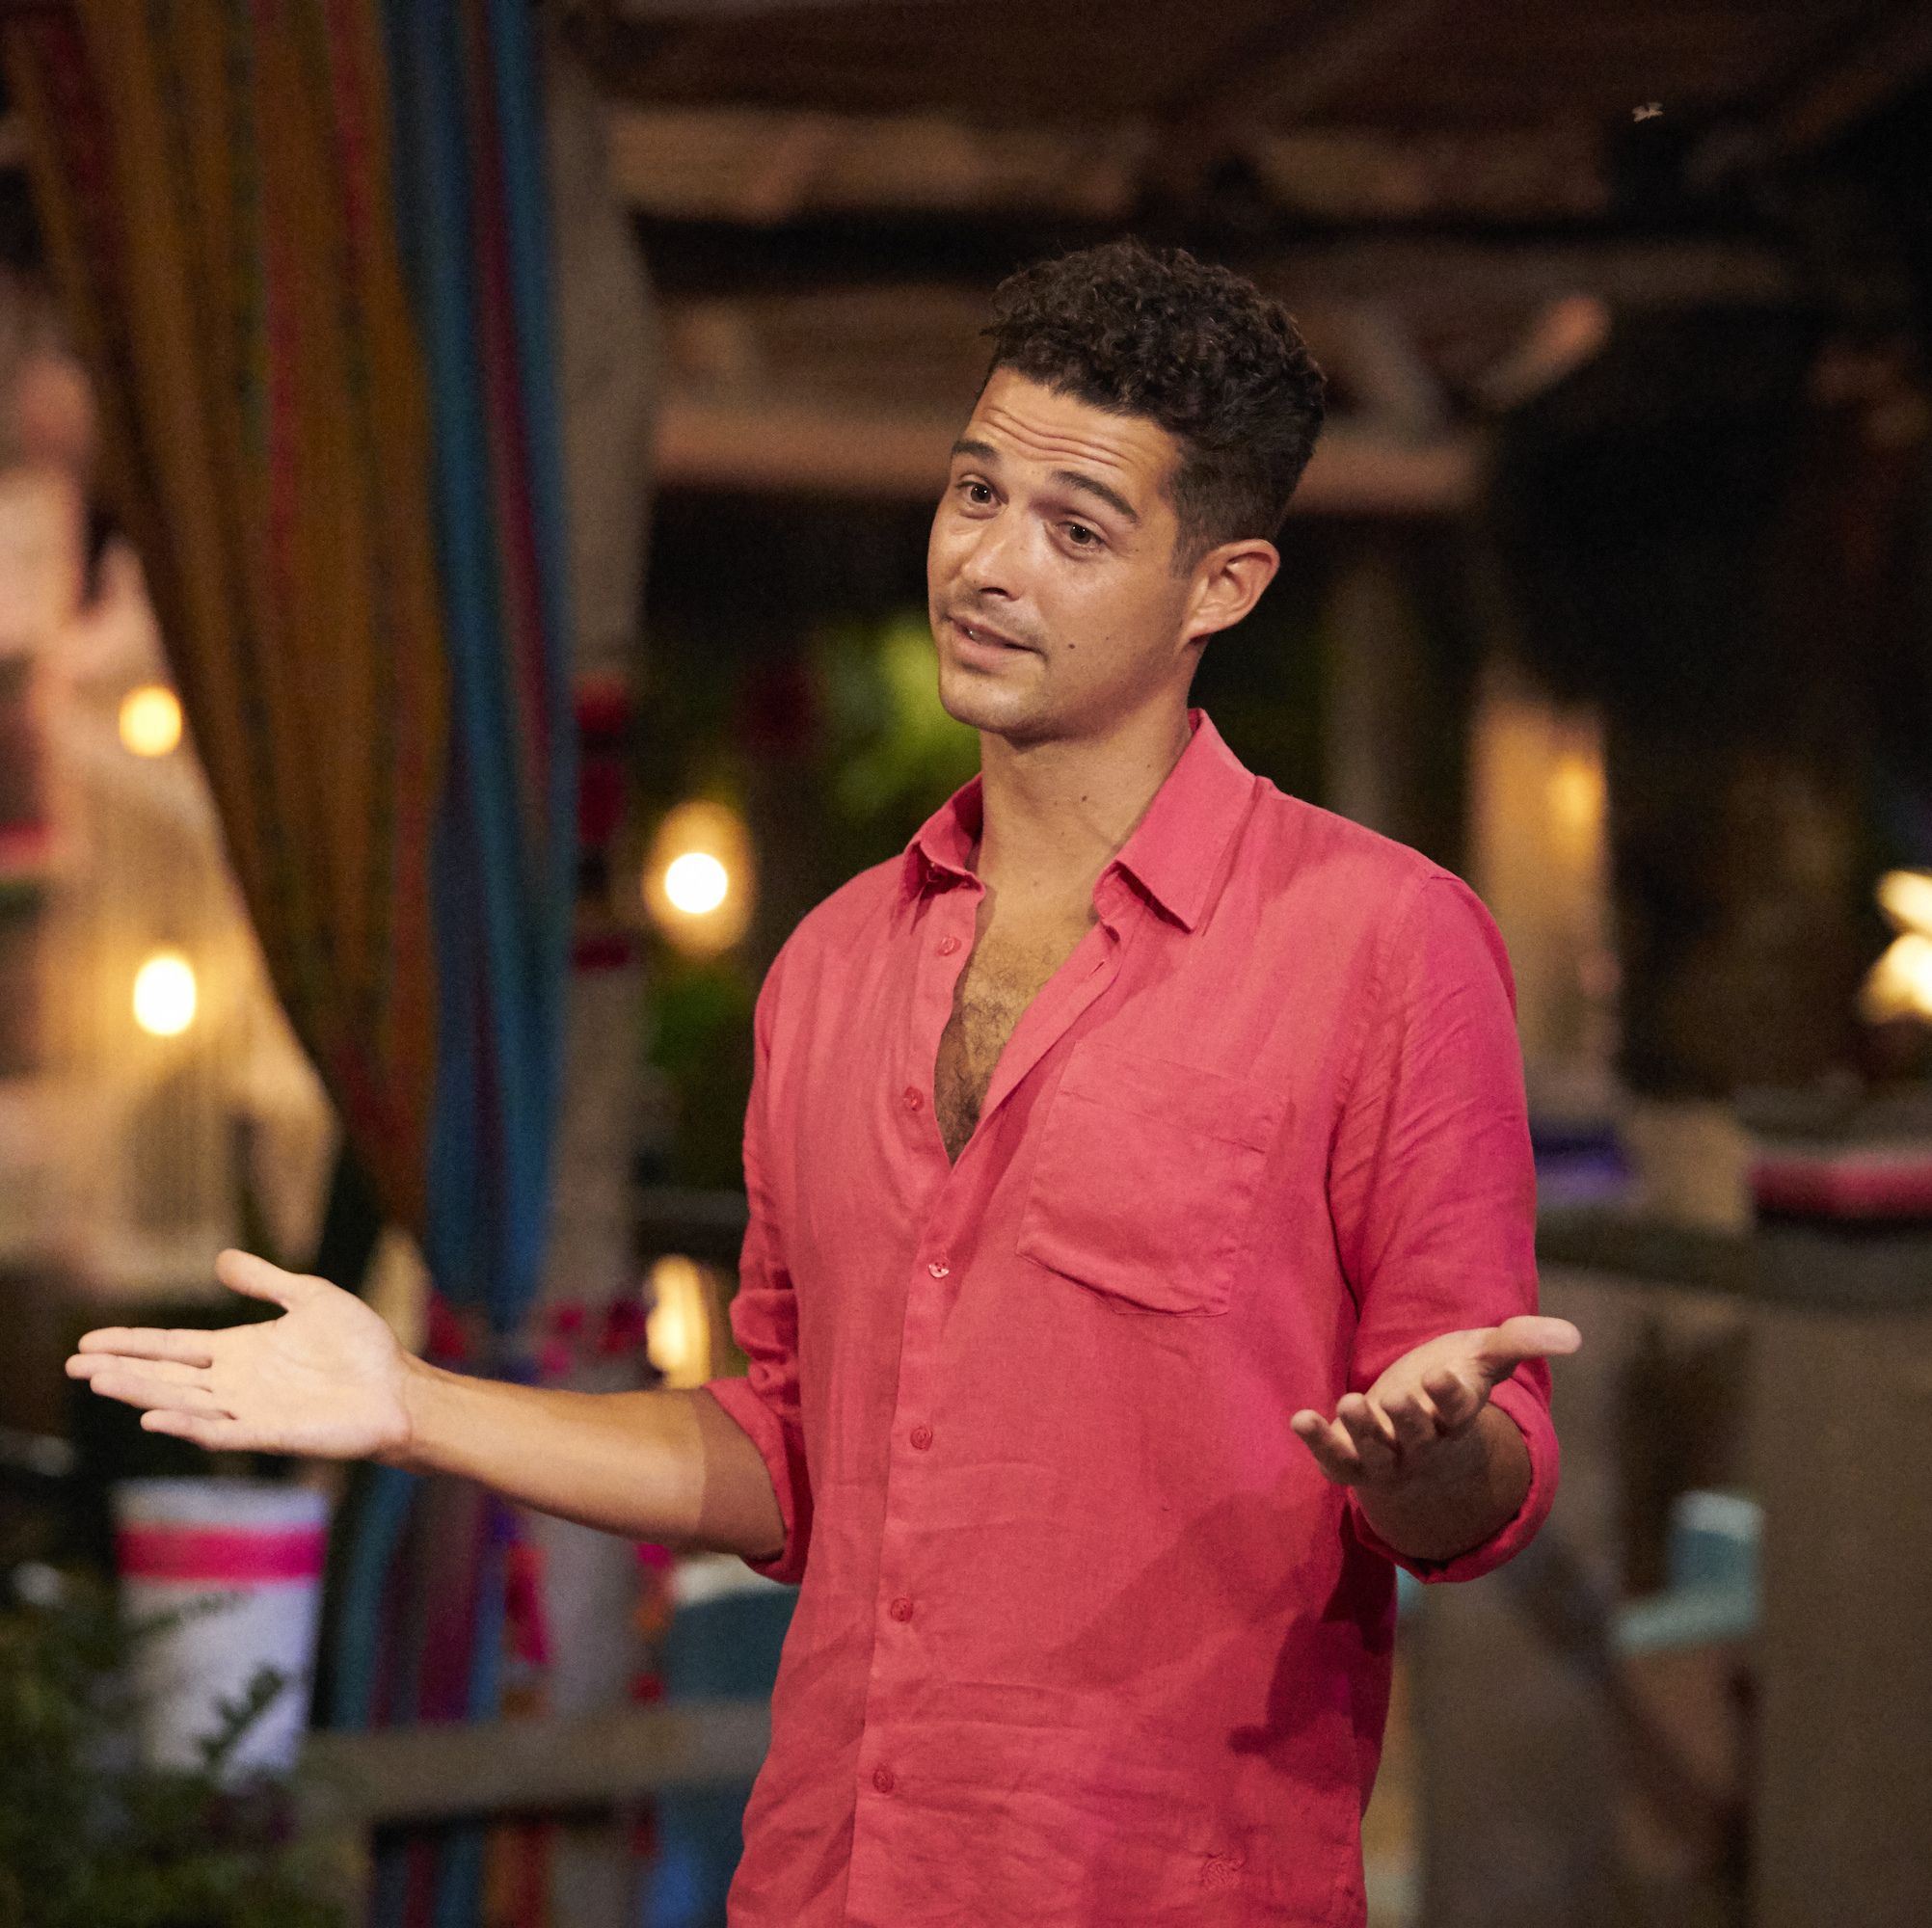 Wells Adams Admits He Was a Little Bummed Not to Be the New 'Bachelor' Host